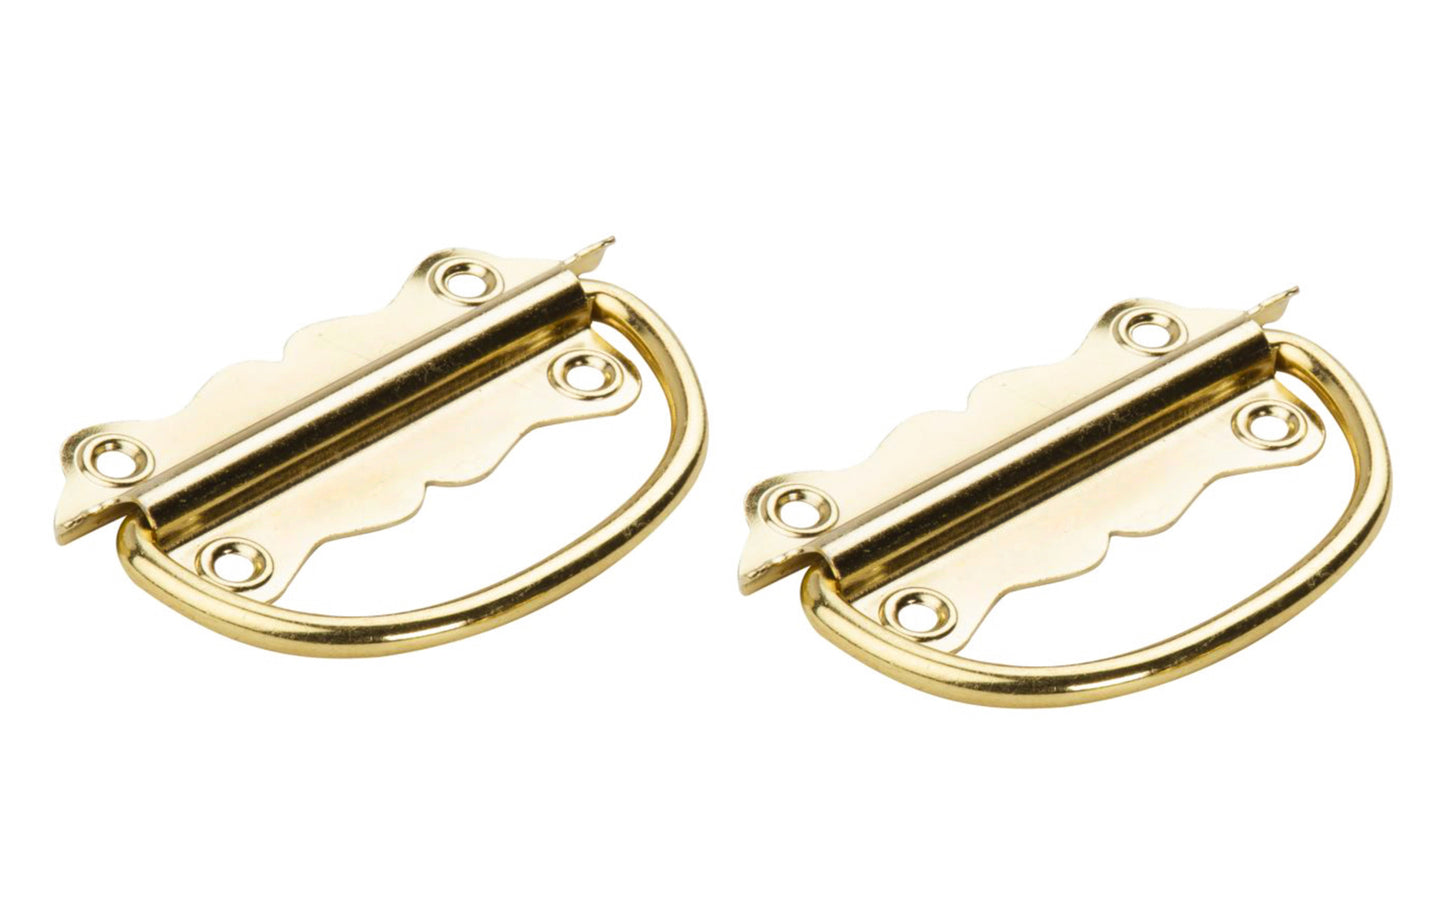 3-1/2" Brass Plated Steel Chest Handles - 2 Pack. These 3-1/2" chest handles are made of steel material with a brass plated finish. Designed for smaller chests & boxes. Sold as two handles in pack. National Hardware Model No. N213-421. 038613213425